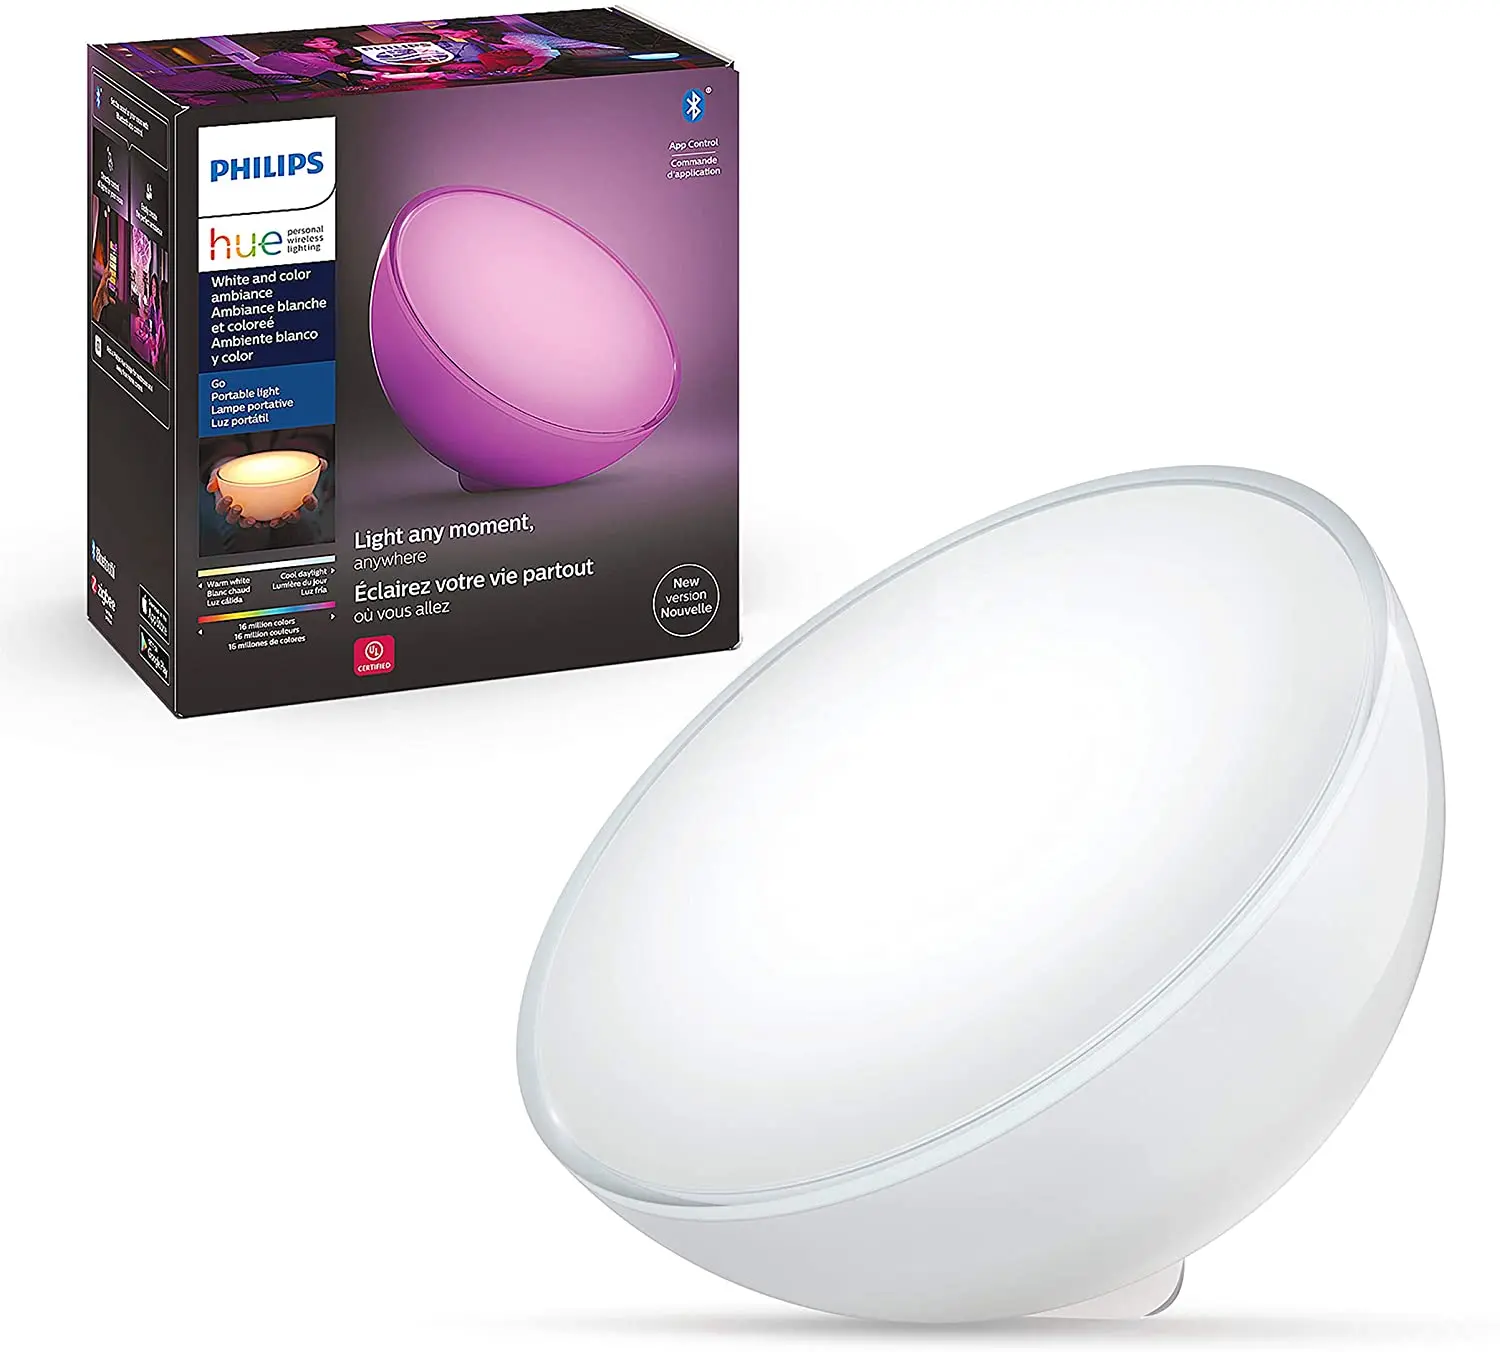 In Stock - High Quality - Hue Go White and Color Portable Dimmable LED Smart Light Table Lamp, White